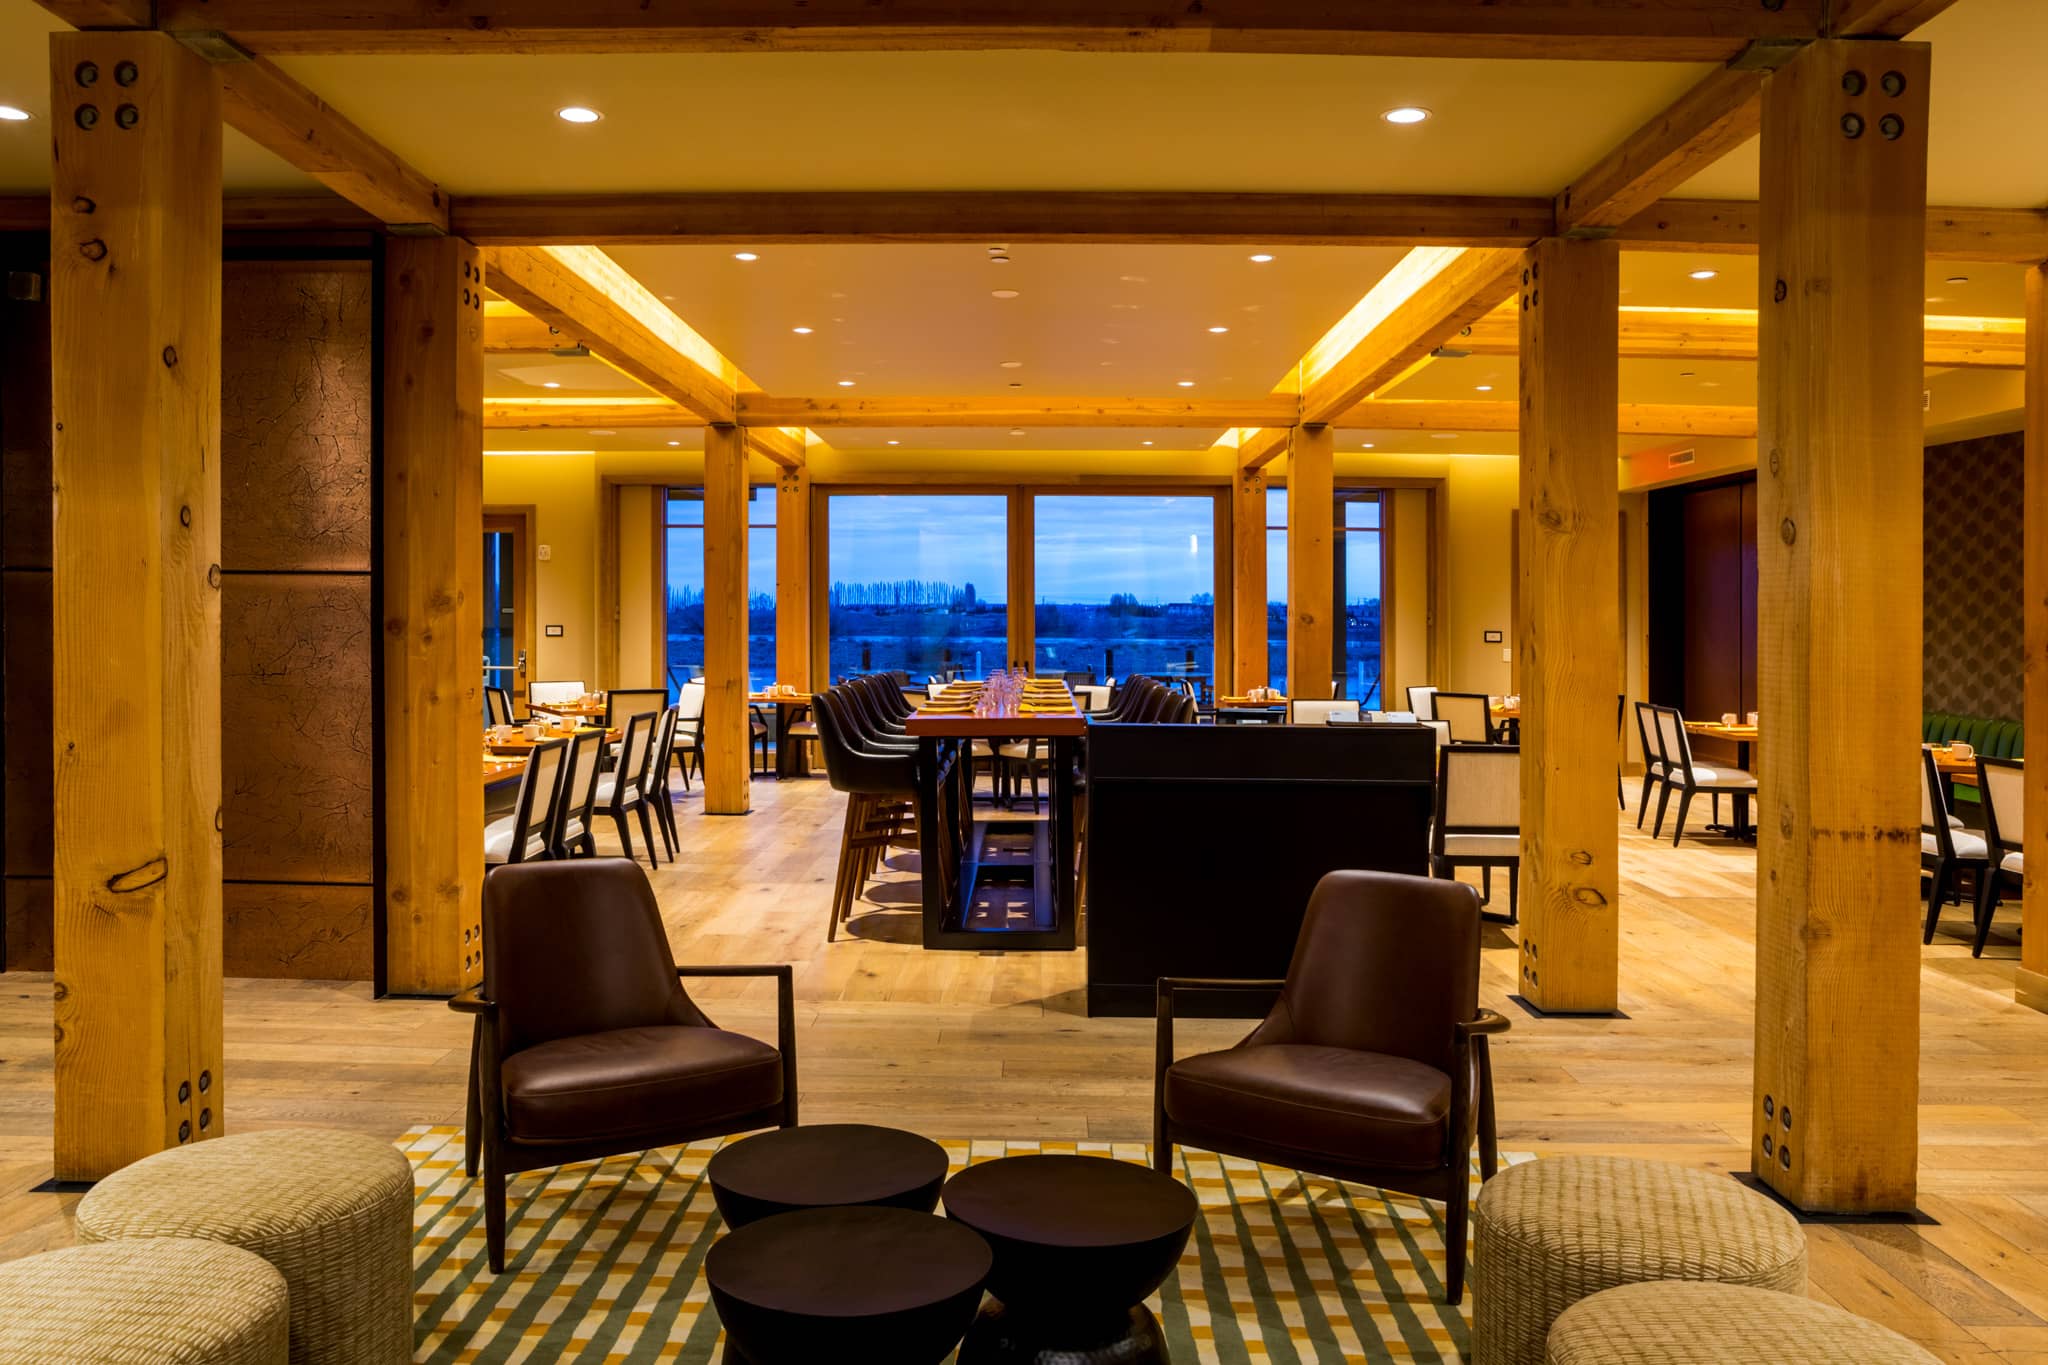 Interior shot of Drumheller's Food and Drink, a riverfront restaurant in Richland, Washington, with romantic lighting and a view of the evening outside.